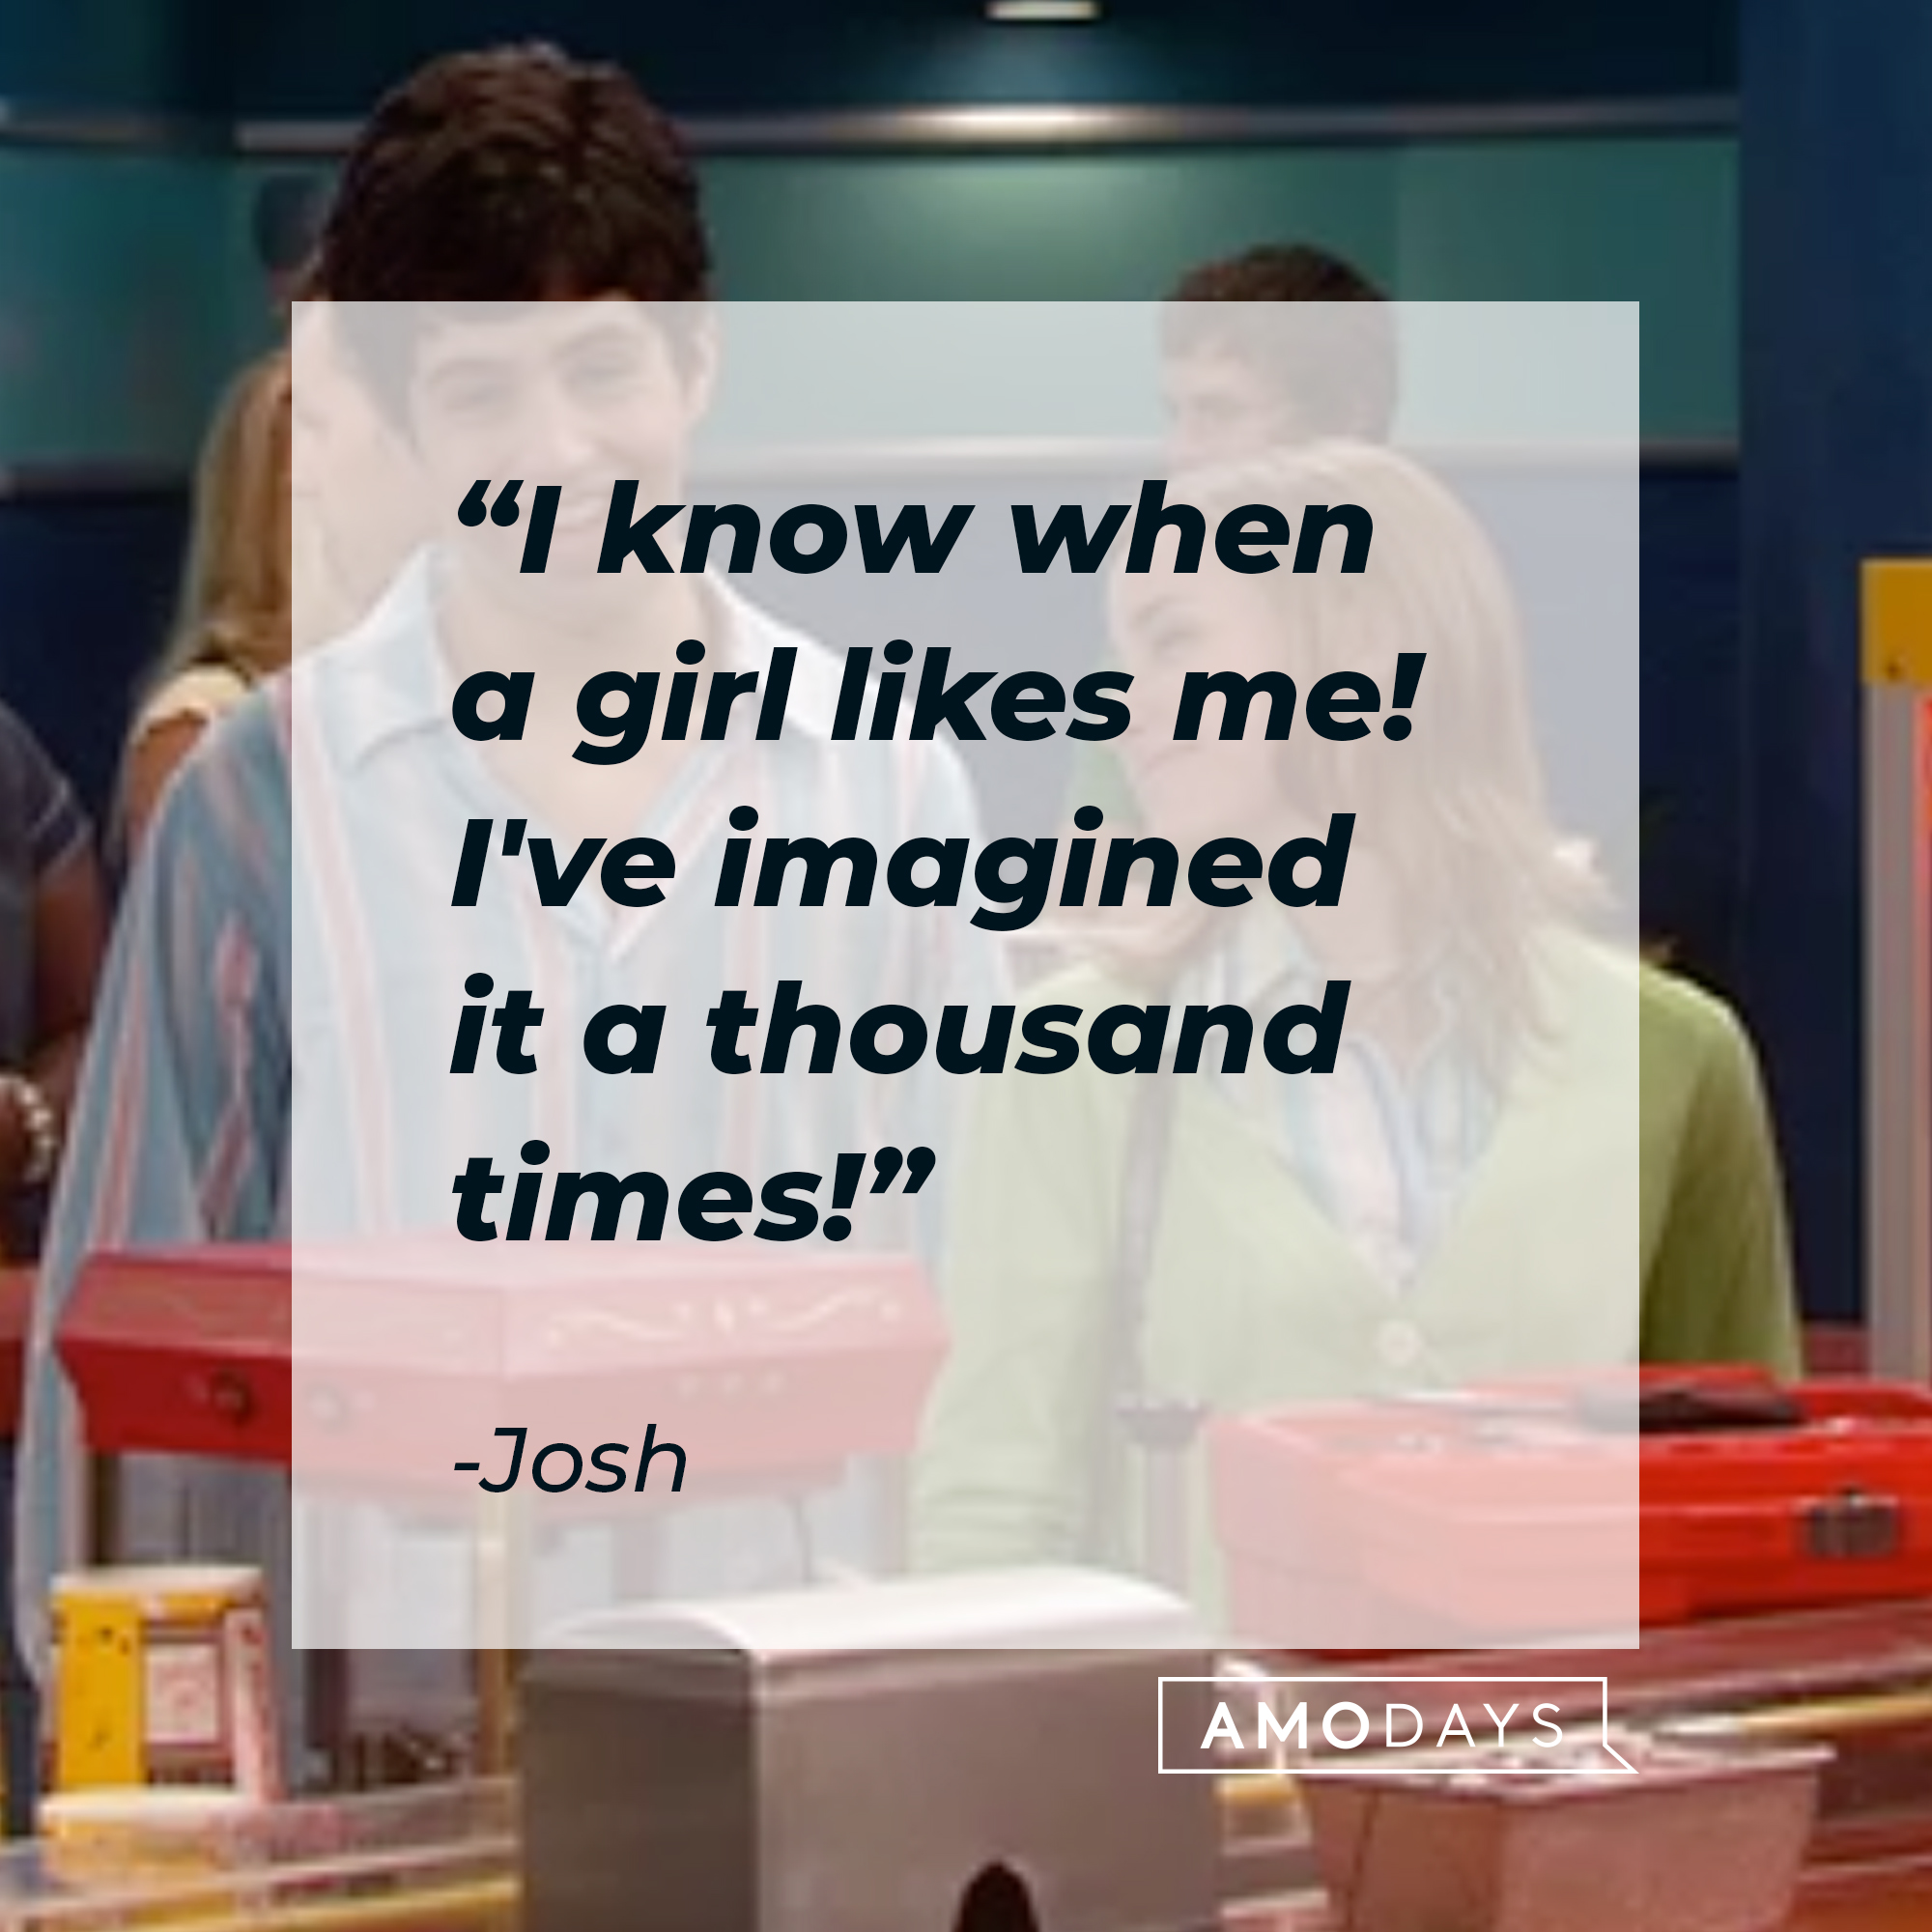 Josh's quote, "I know when a girl likes me! I've imagined it a thousand times!" | Source: facebook.com/Drake & Josh